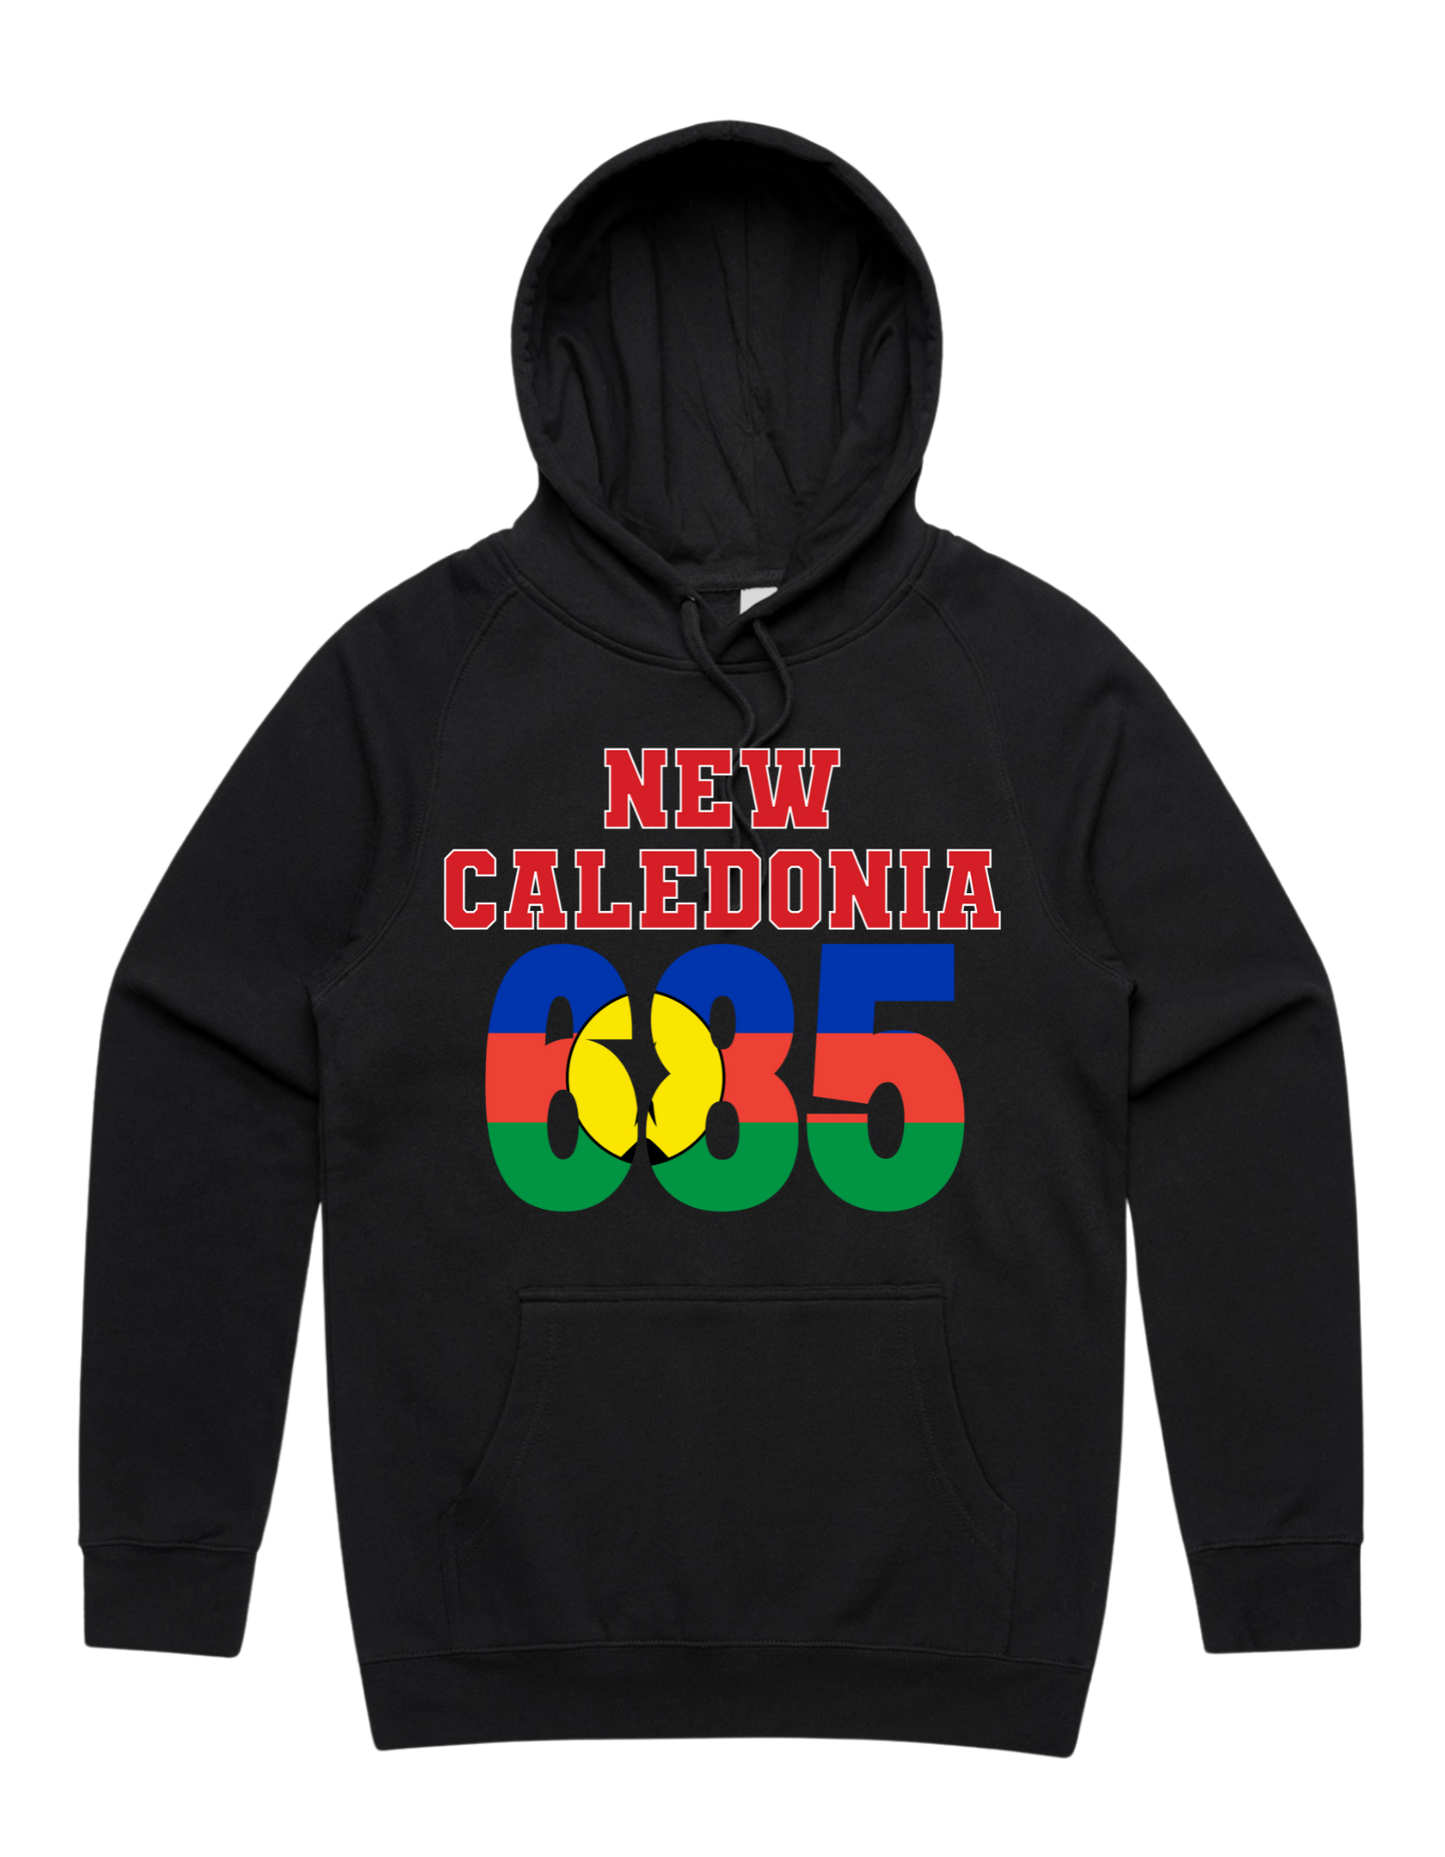 New Caledonia Supply Hood 5101 - AS Colour